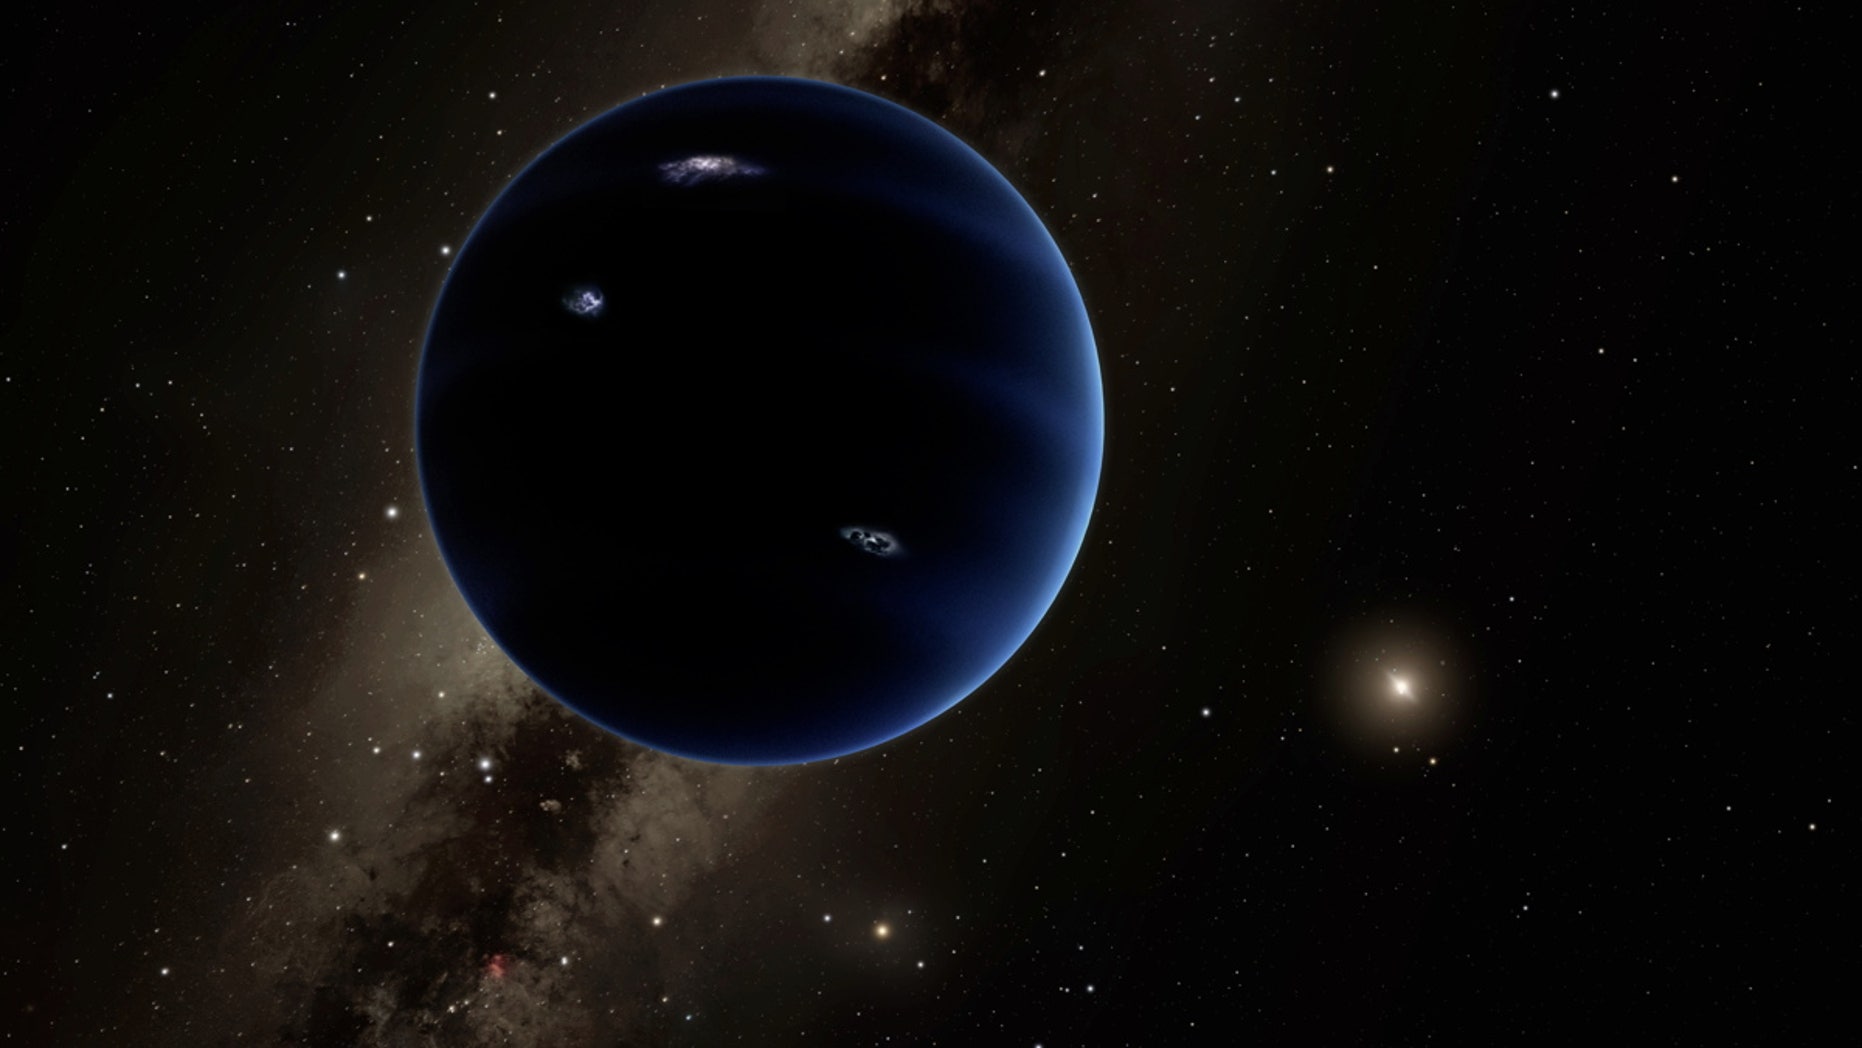 Planet Nine may not exist but another mysterious object deep in the solar system could be lurking